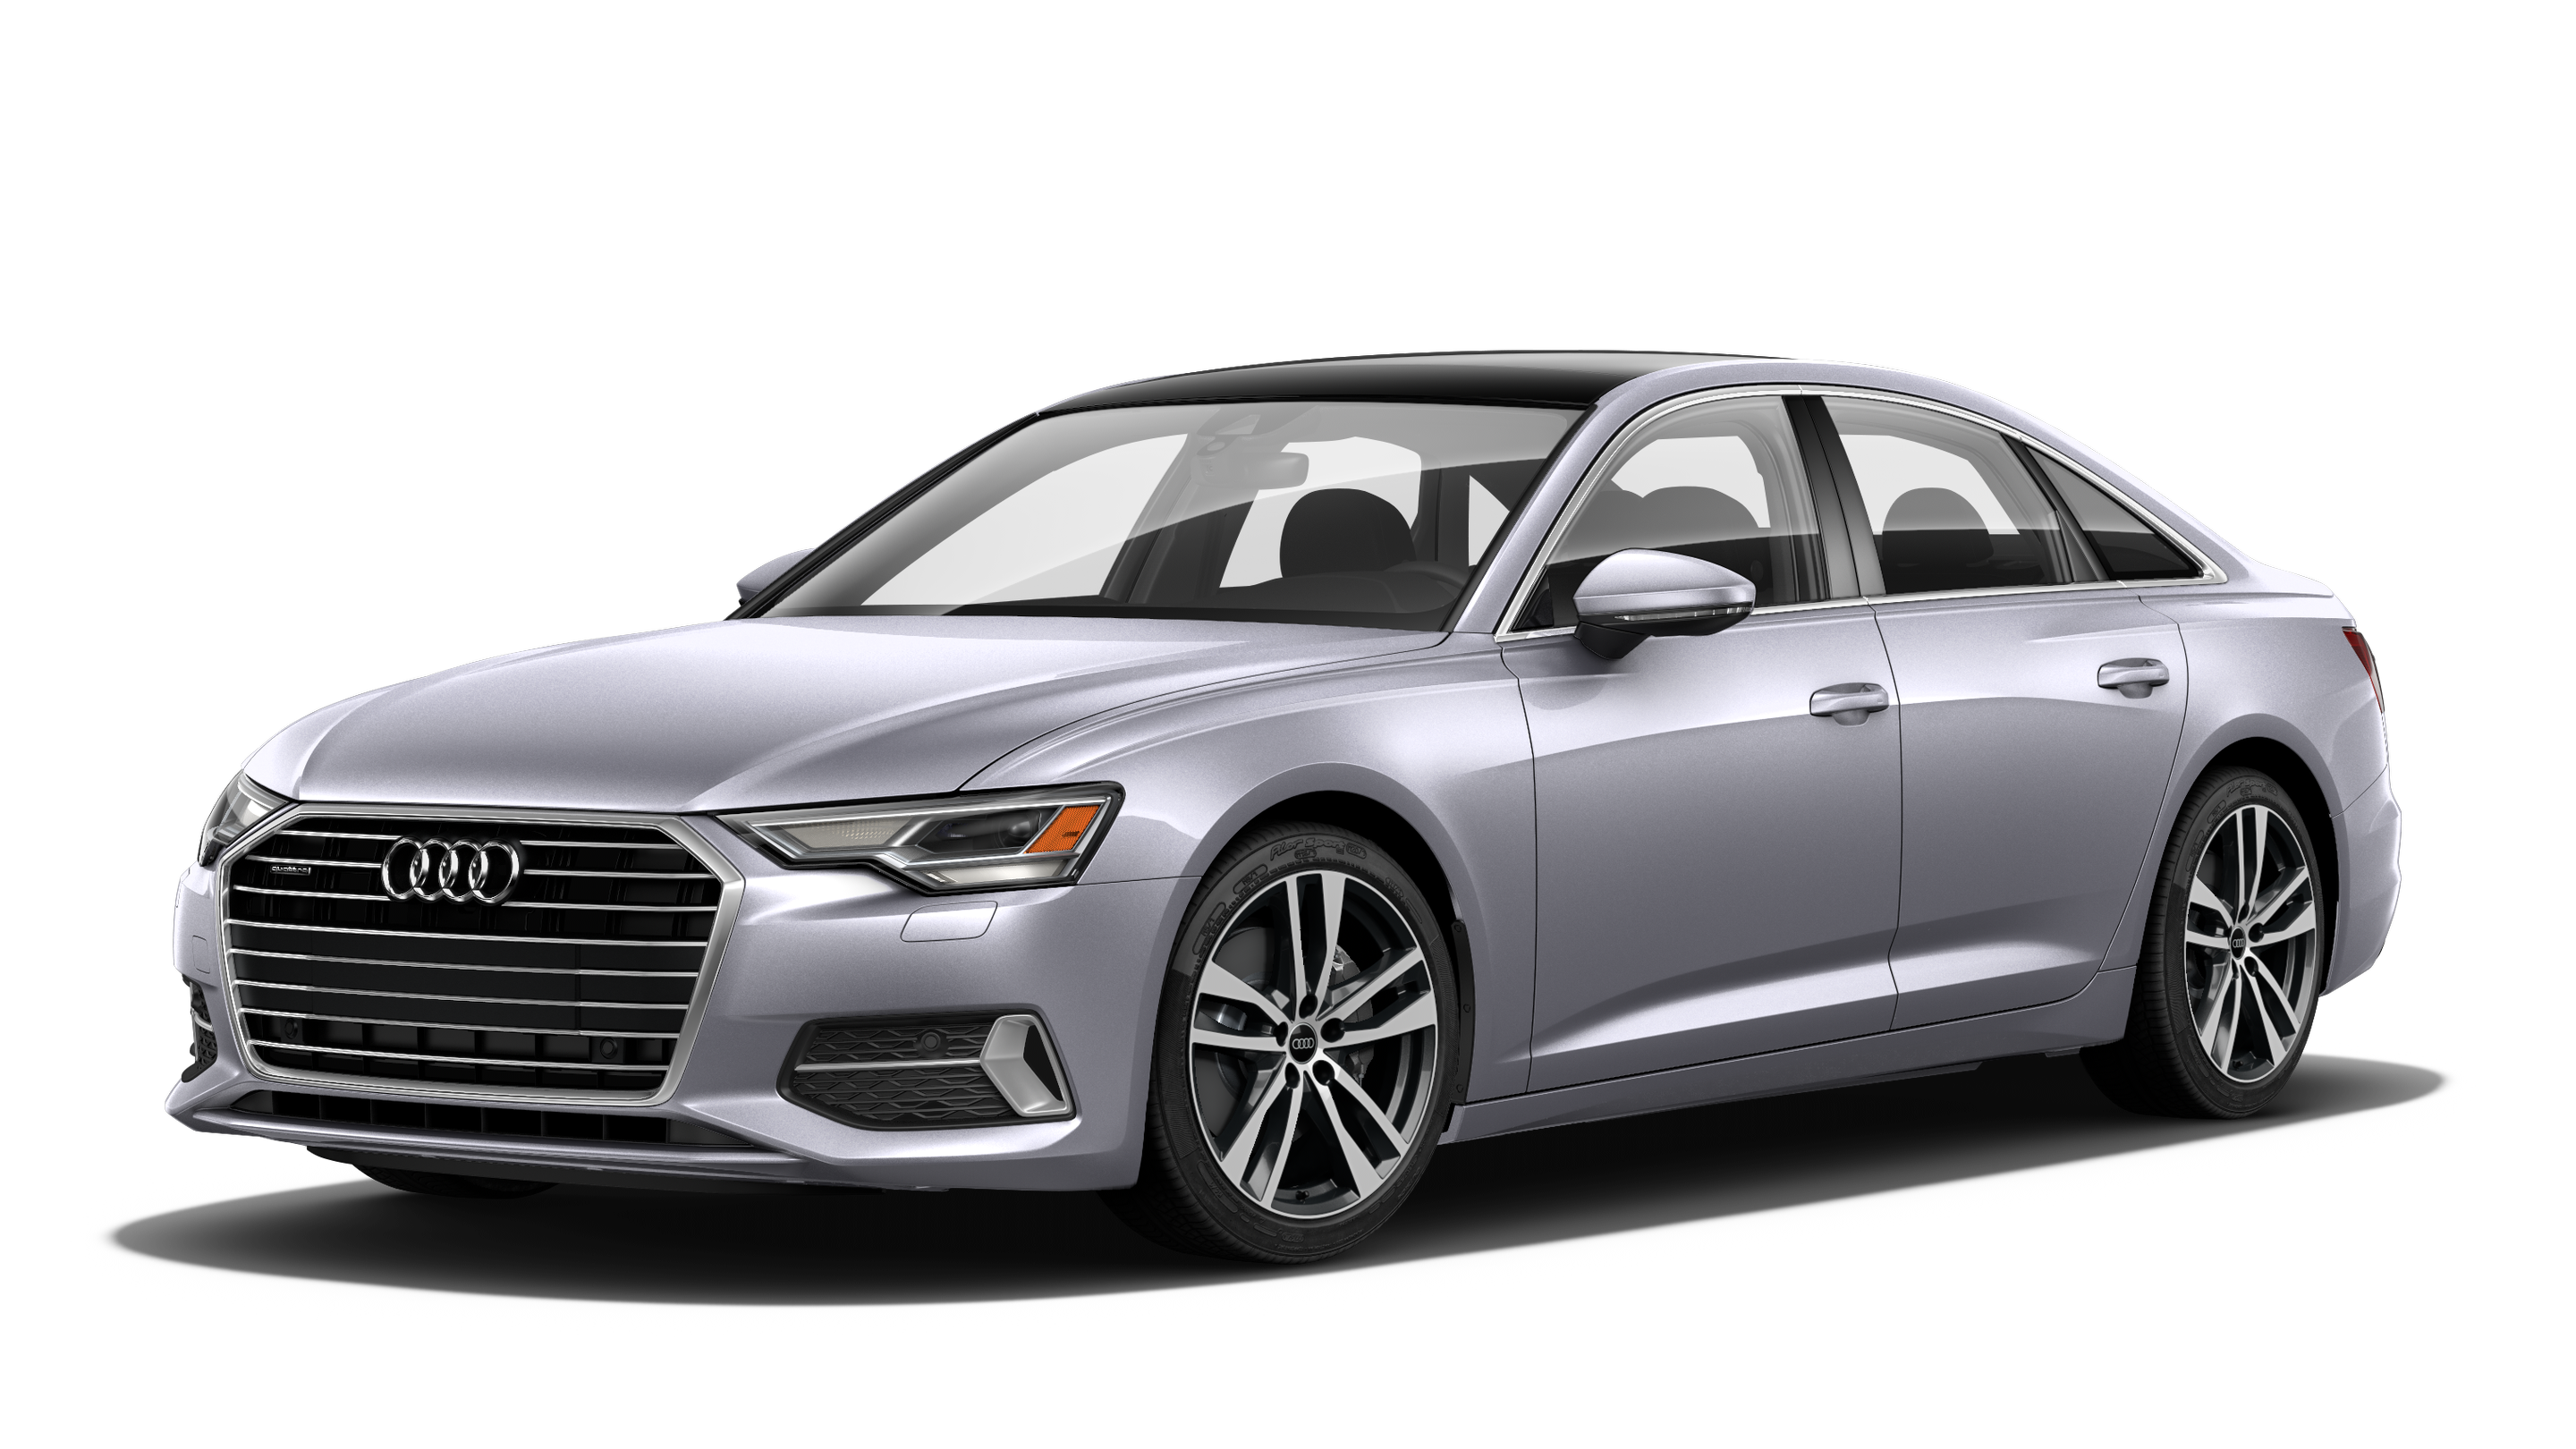 2019 Audi A6 review: Buttoned-up sedan is bursting with tech - CNET